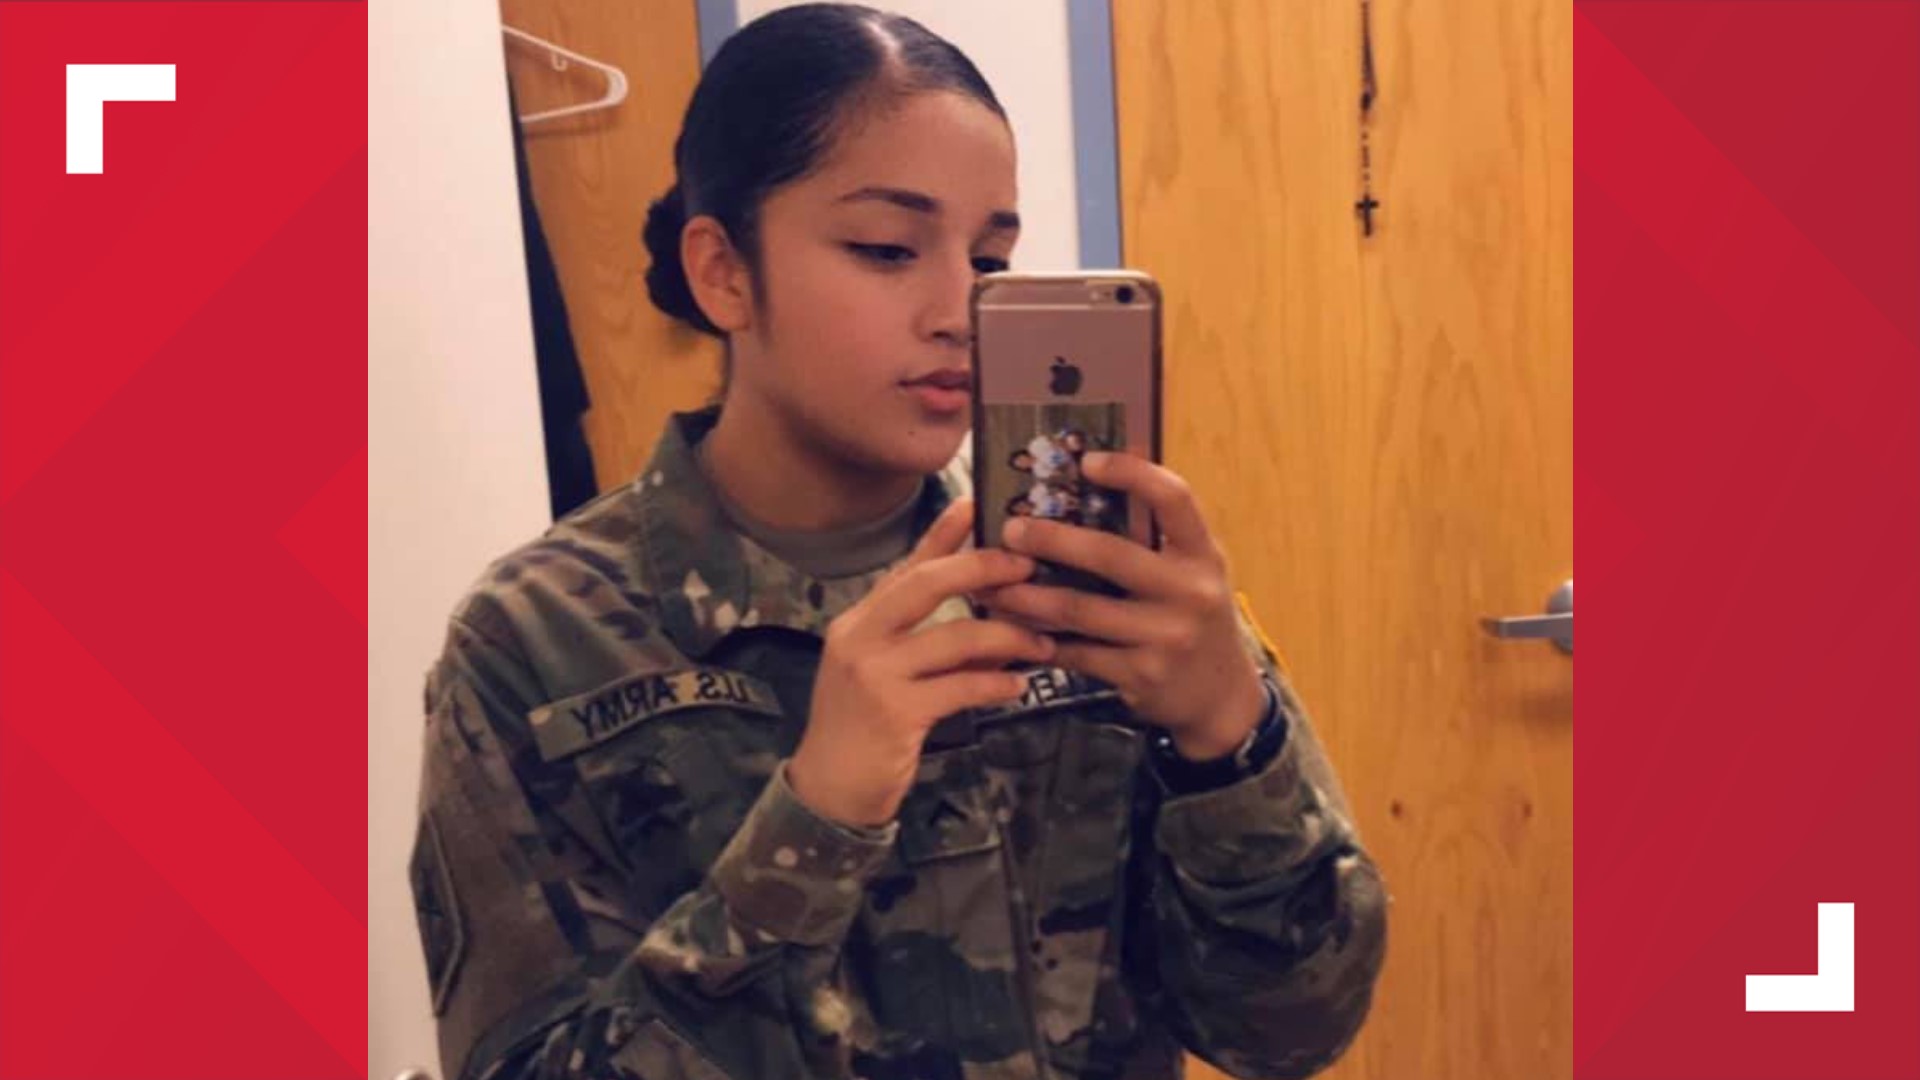 LULAC is calling for zero enlistments into the U.S. Army. The Guillen family is asking for a congressional investigation. What did members of congress have to say?